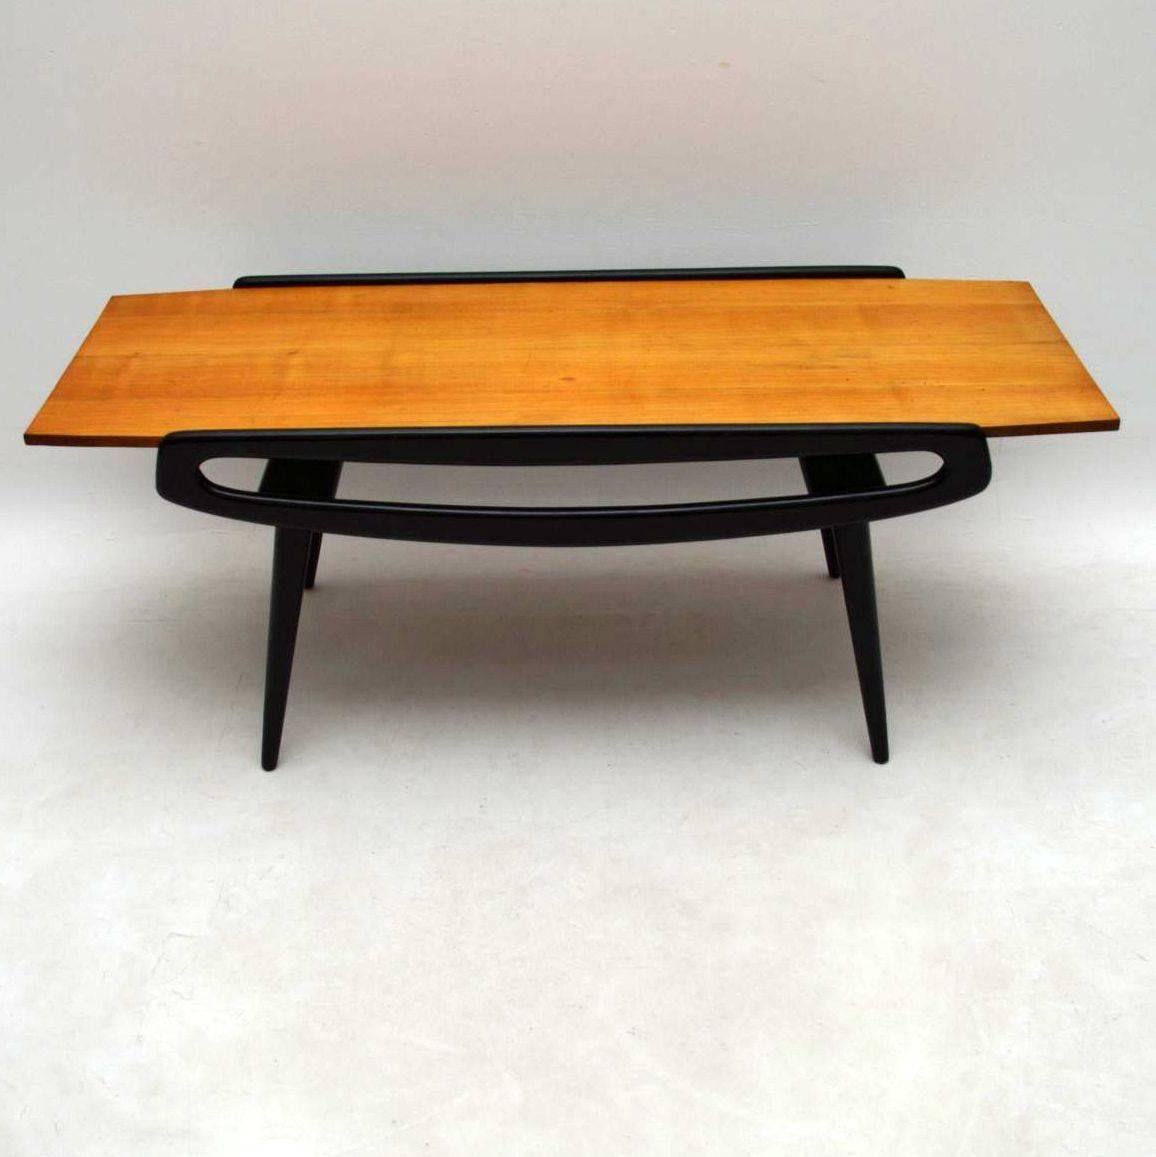 A beautiful coffee table dating from the 1950-1960s, this was made in Italy and is very elegantly styled. The top is Sycamore and the frame is ebonized solid wood. The condition is very good for its age, with only few minor marks to the polish on